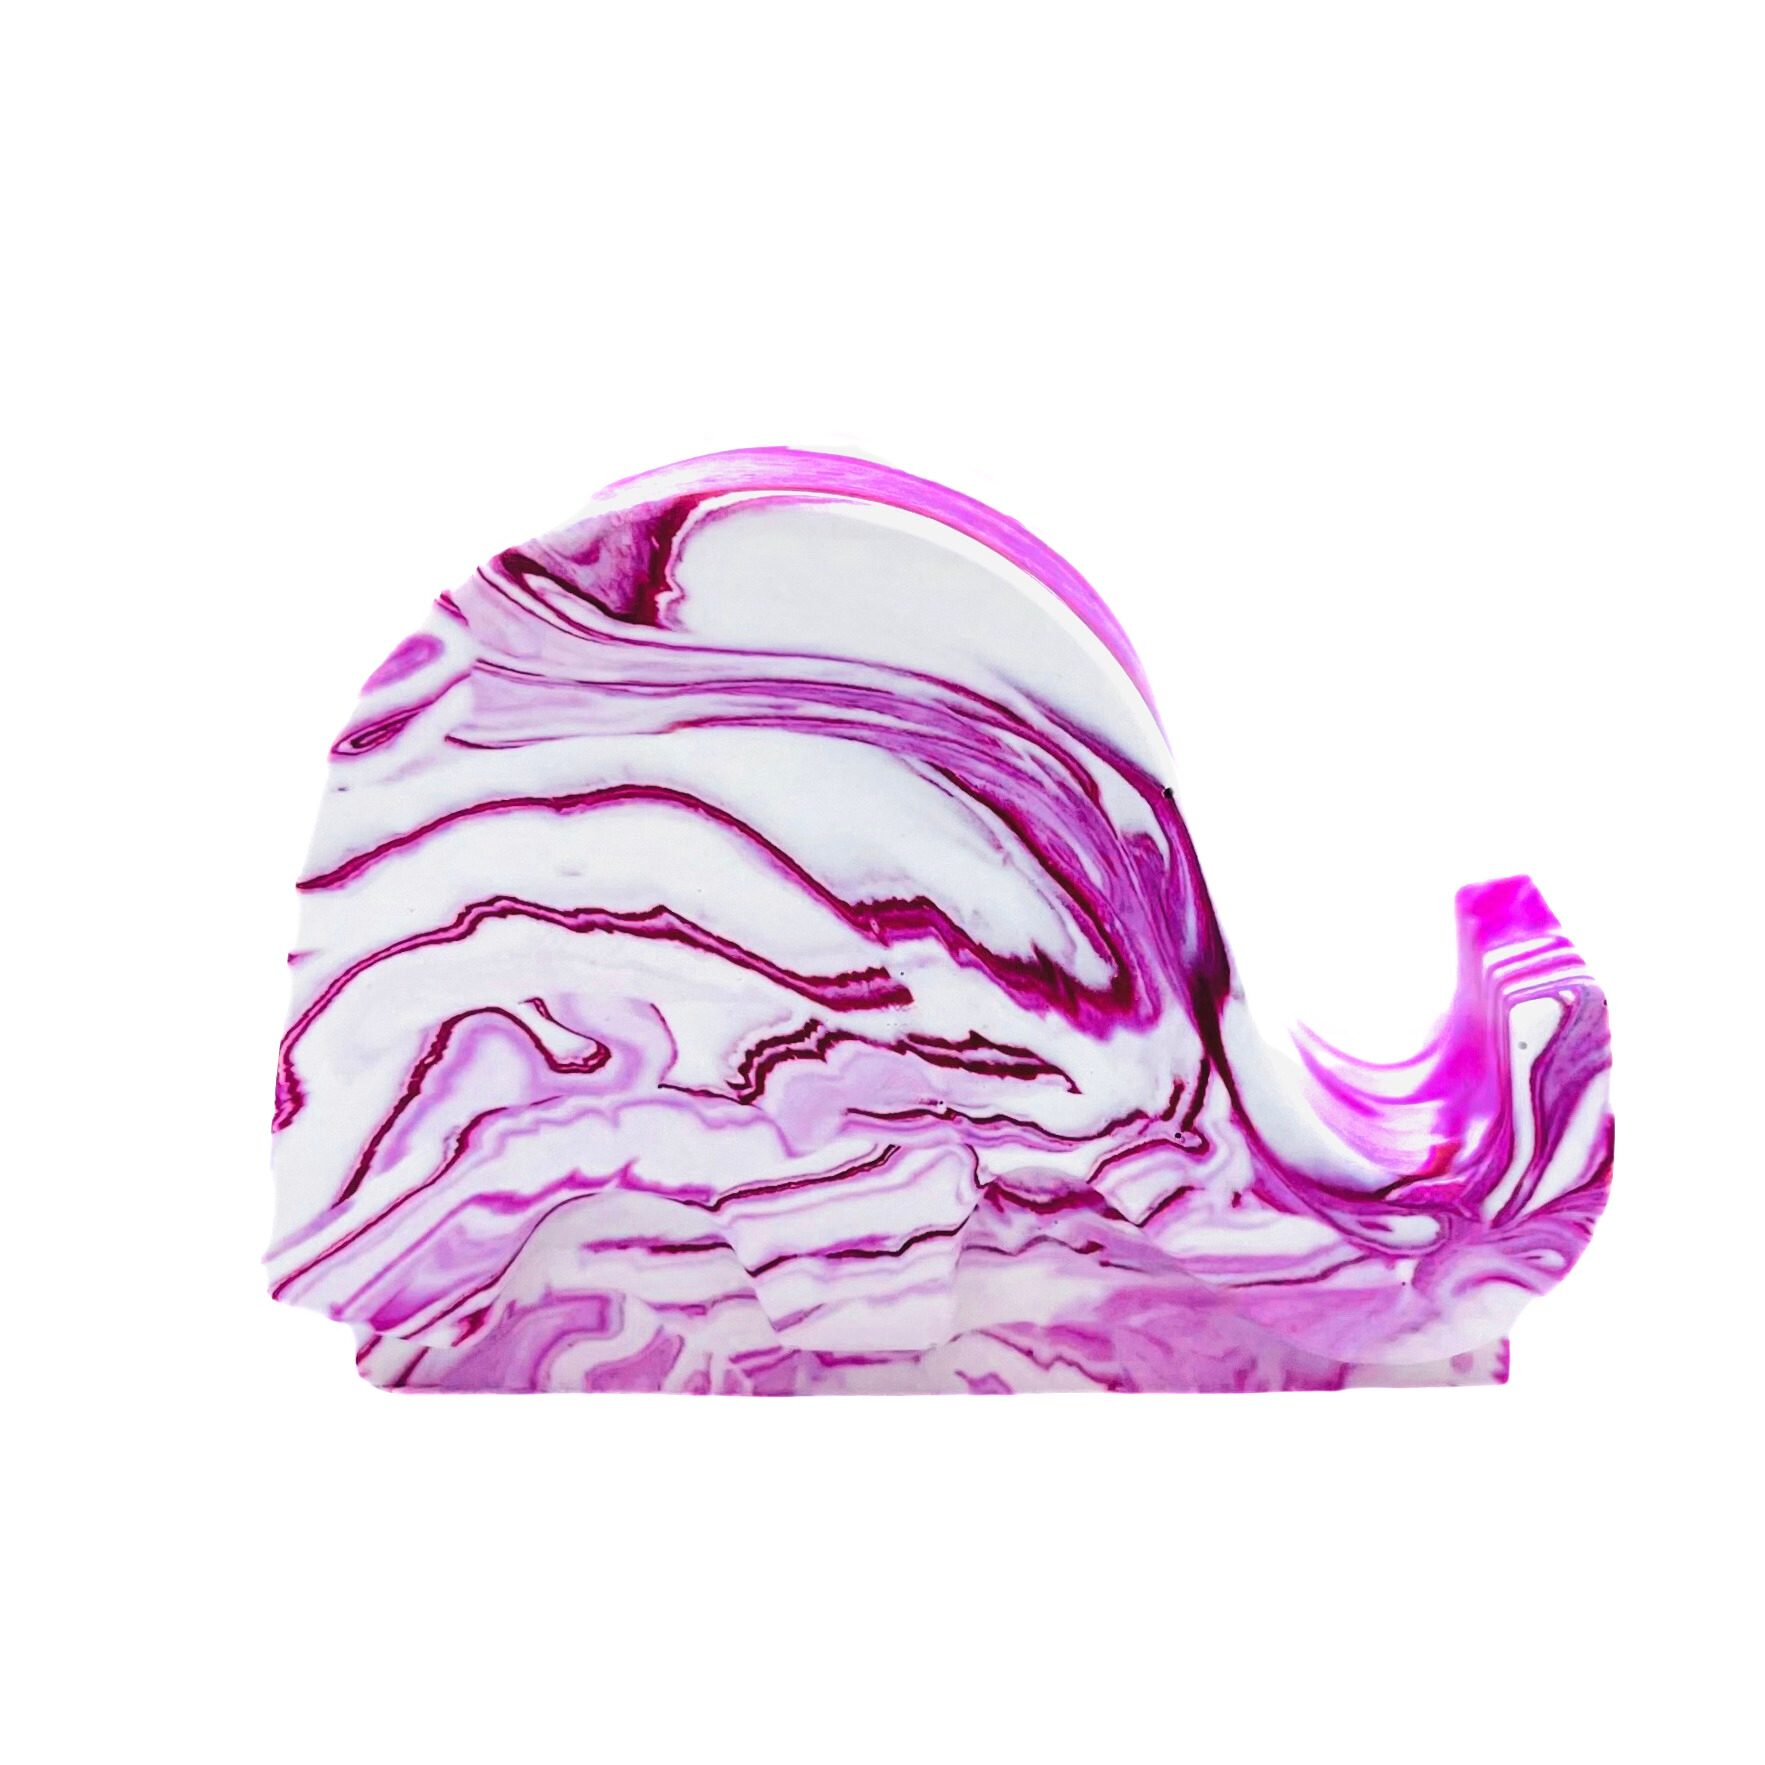 A Jesmonite elephant mobile phone stand measuring 6.5cm in length marbled with magenta pigment.